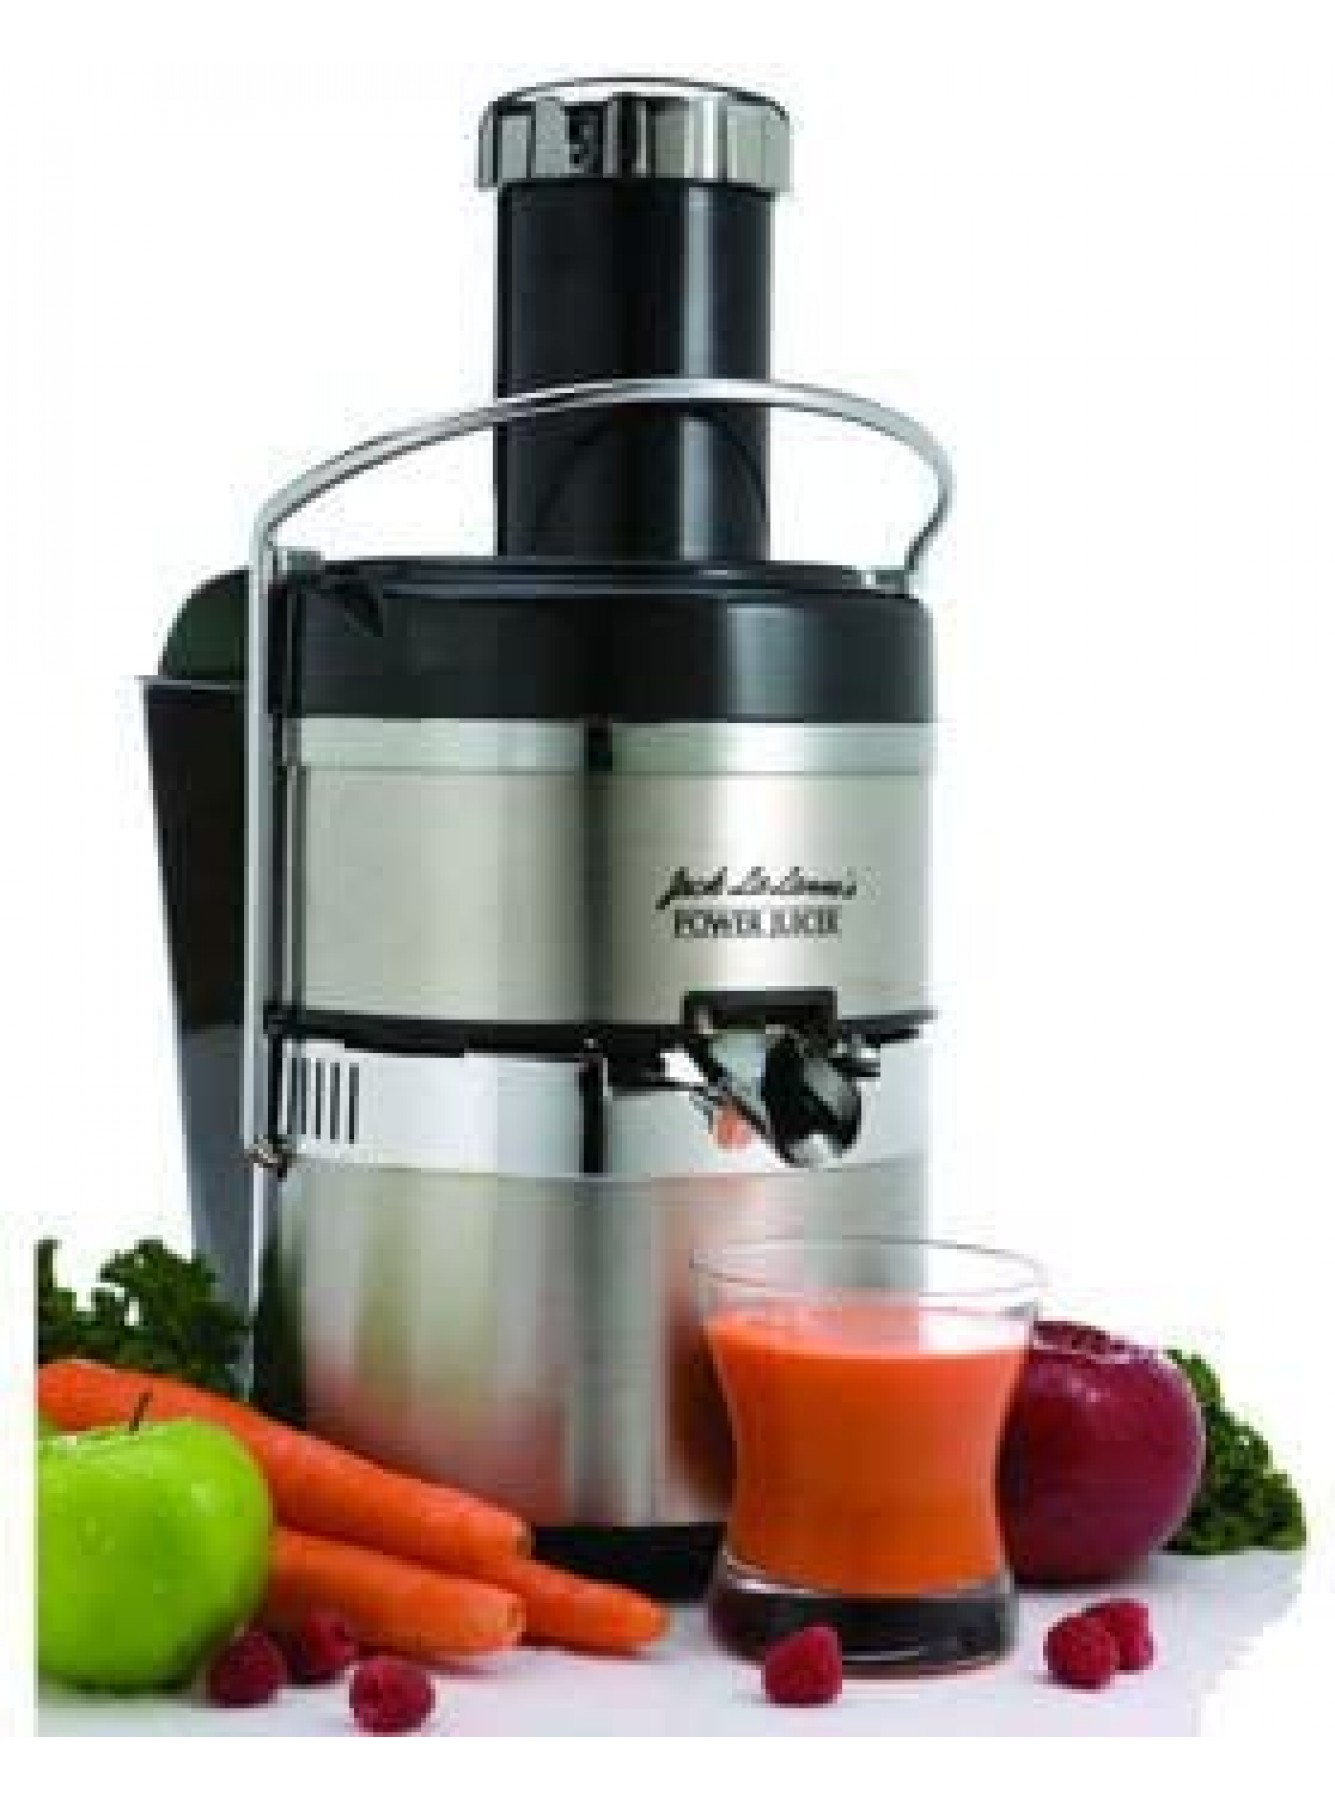 Jack LaLanne's Ultimate Power Juicer B00DY824F4